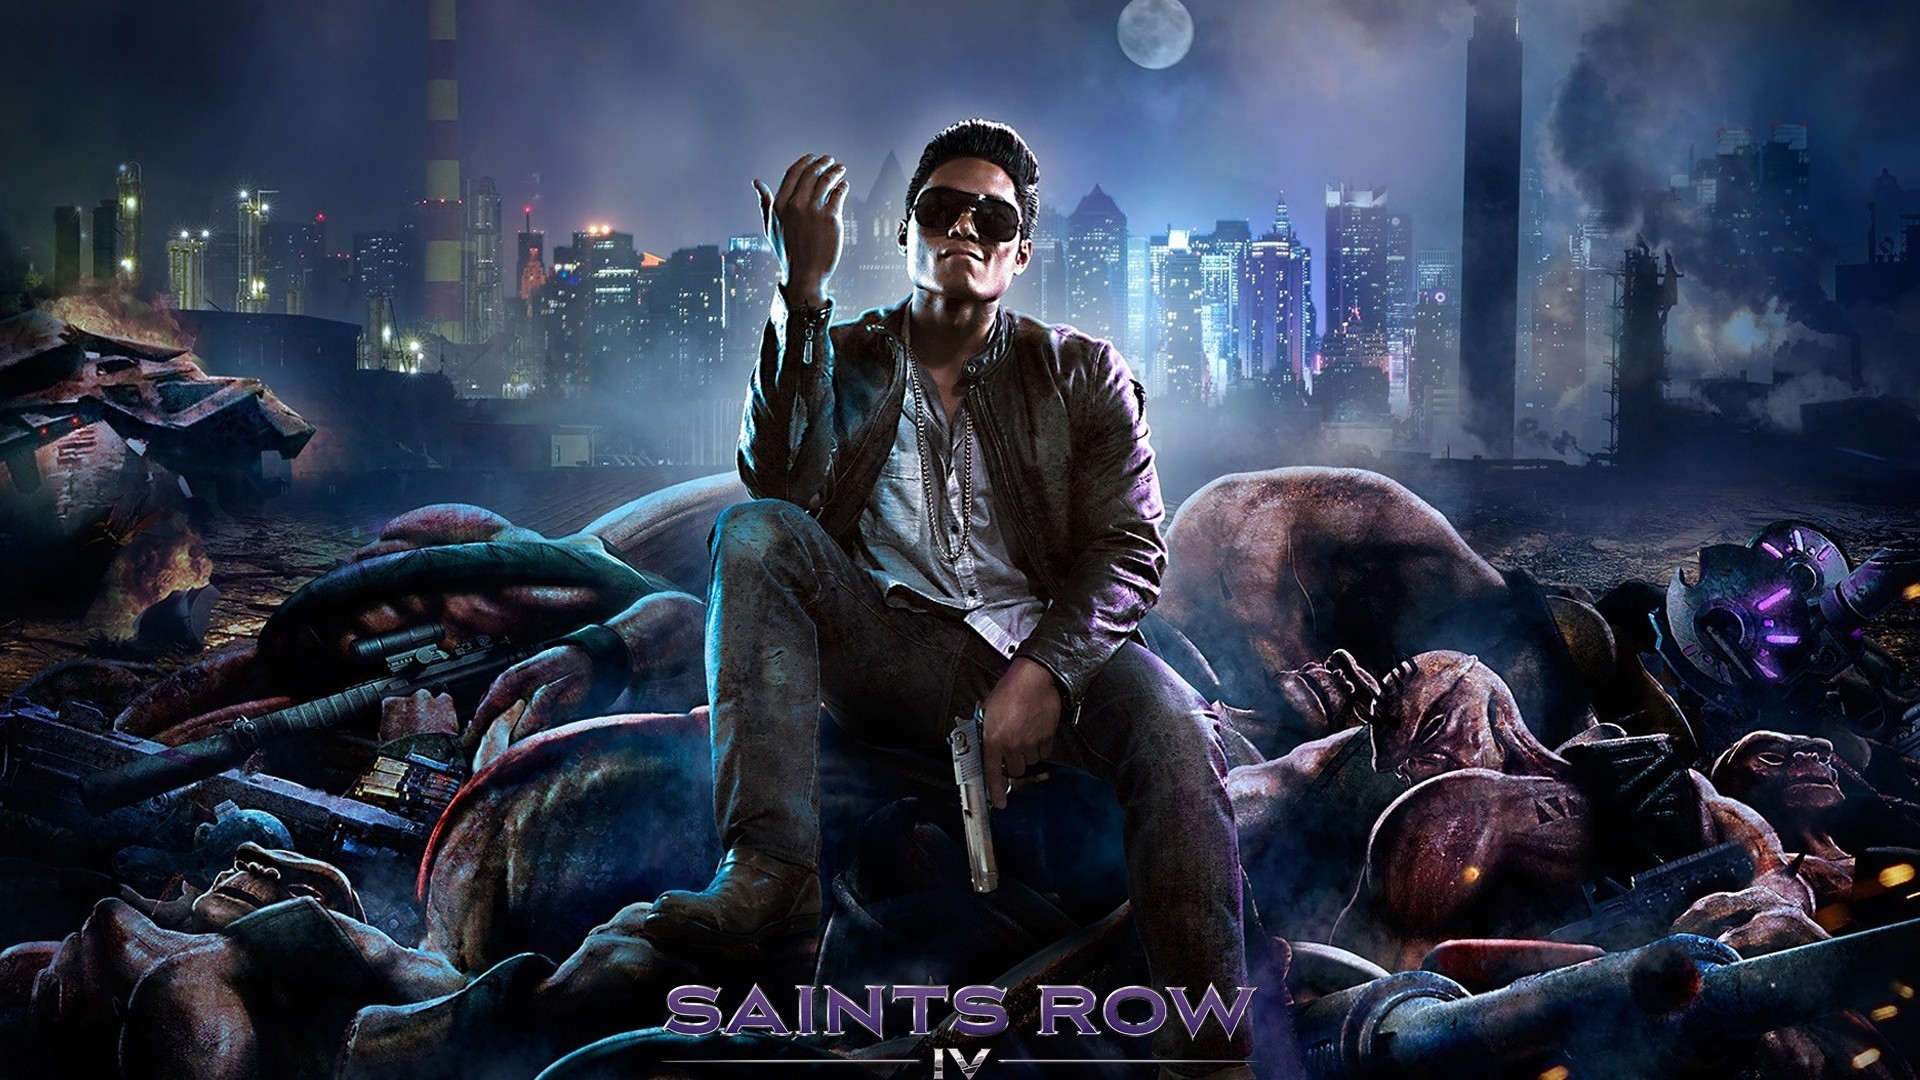 Saints Row 4 Poster for 1920 x 1080 HDTV 1080p resolution